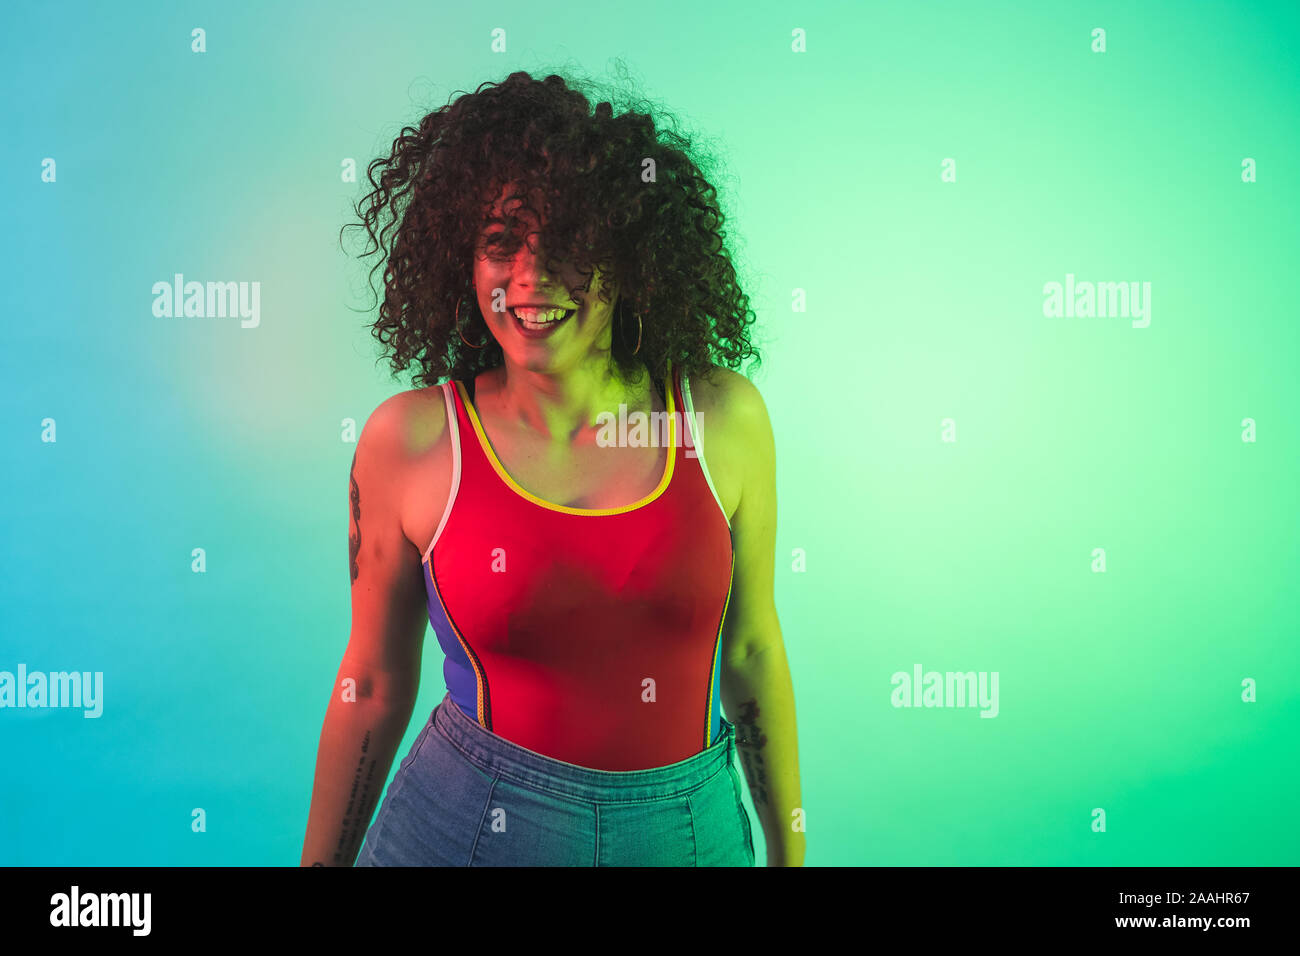 Young woman in red tank top posing against turquoise background Stock Photo